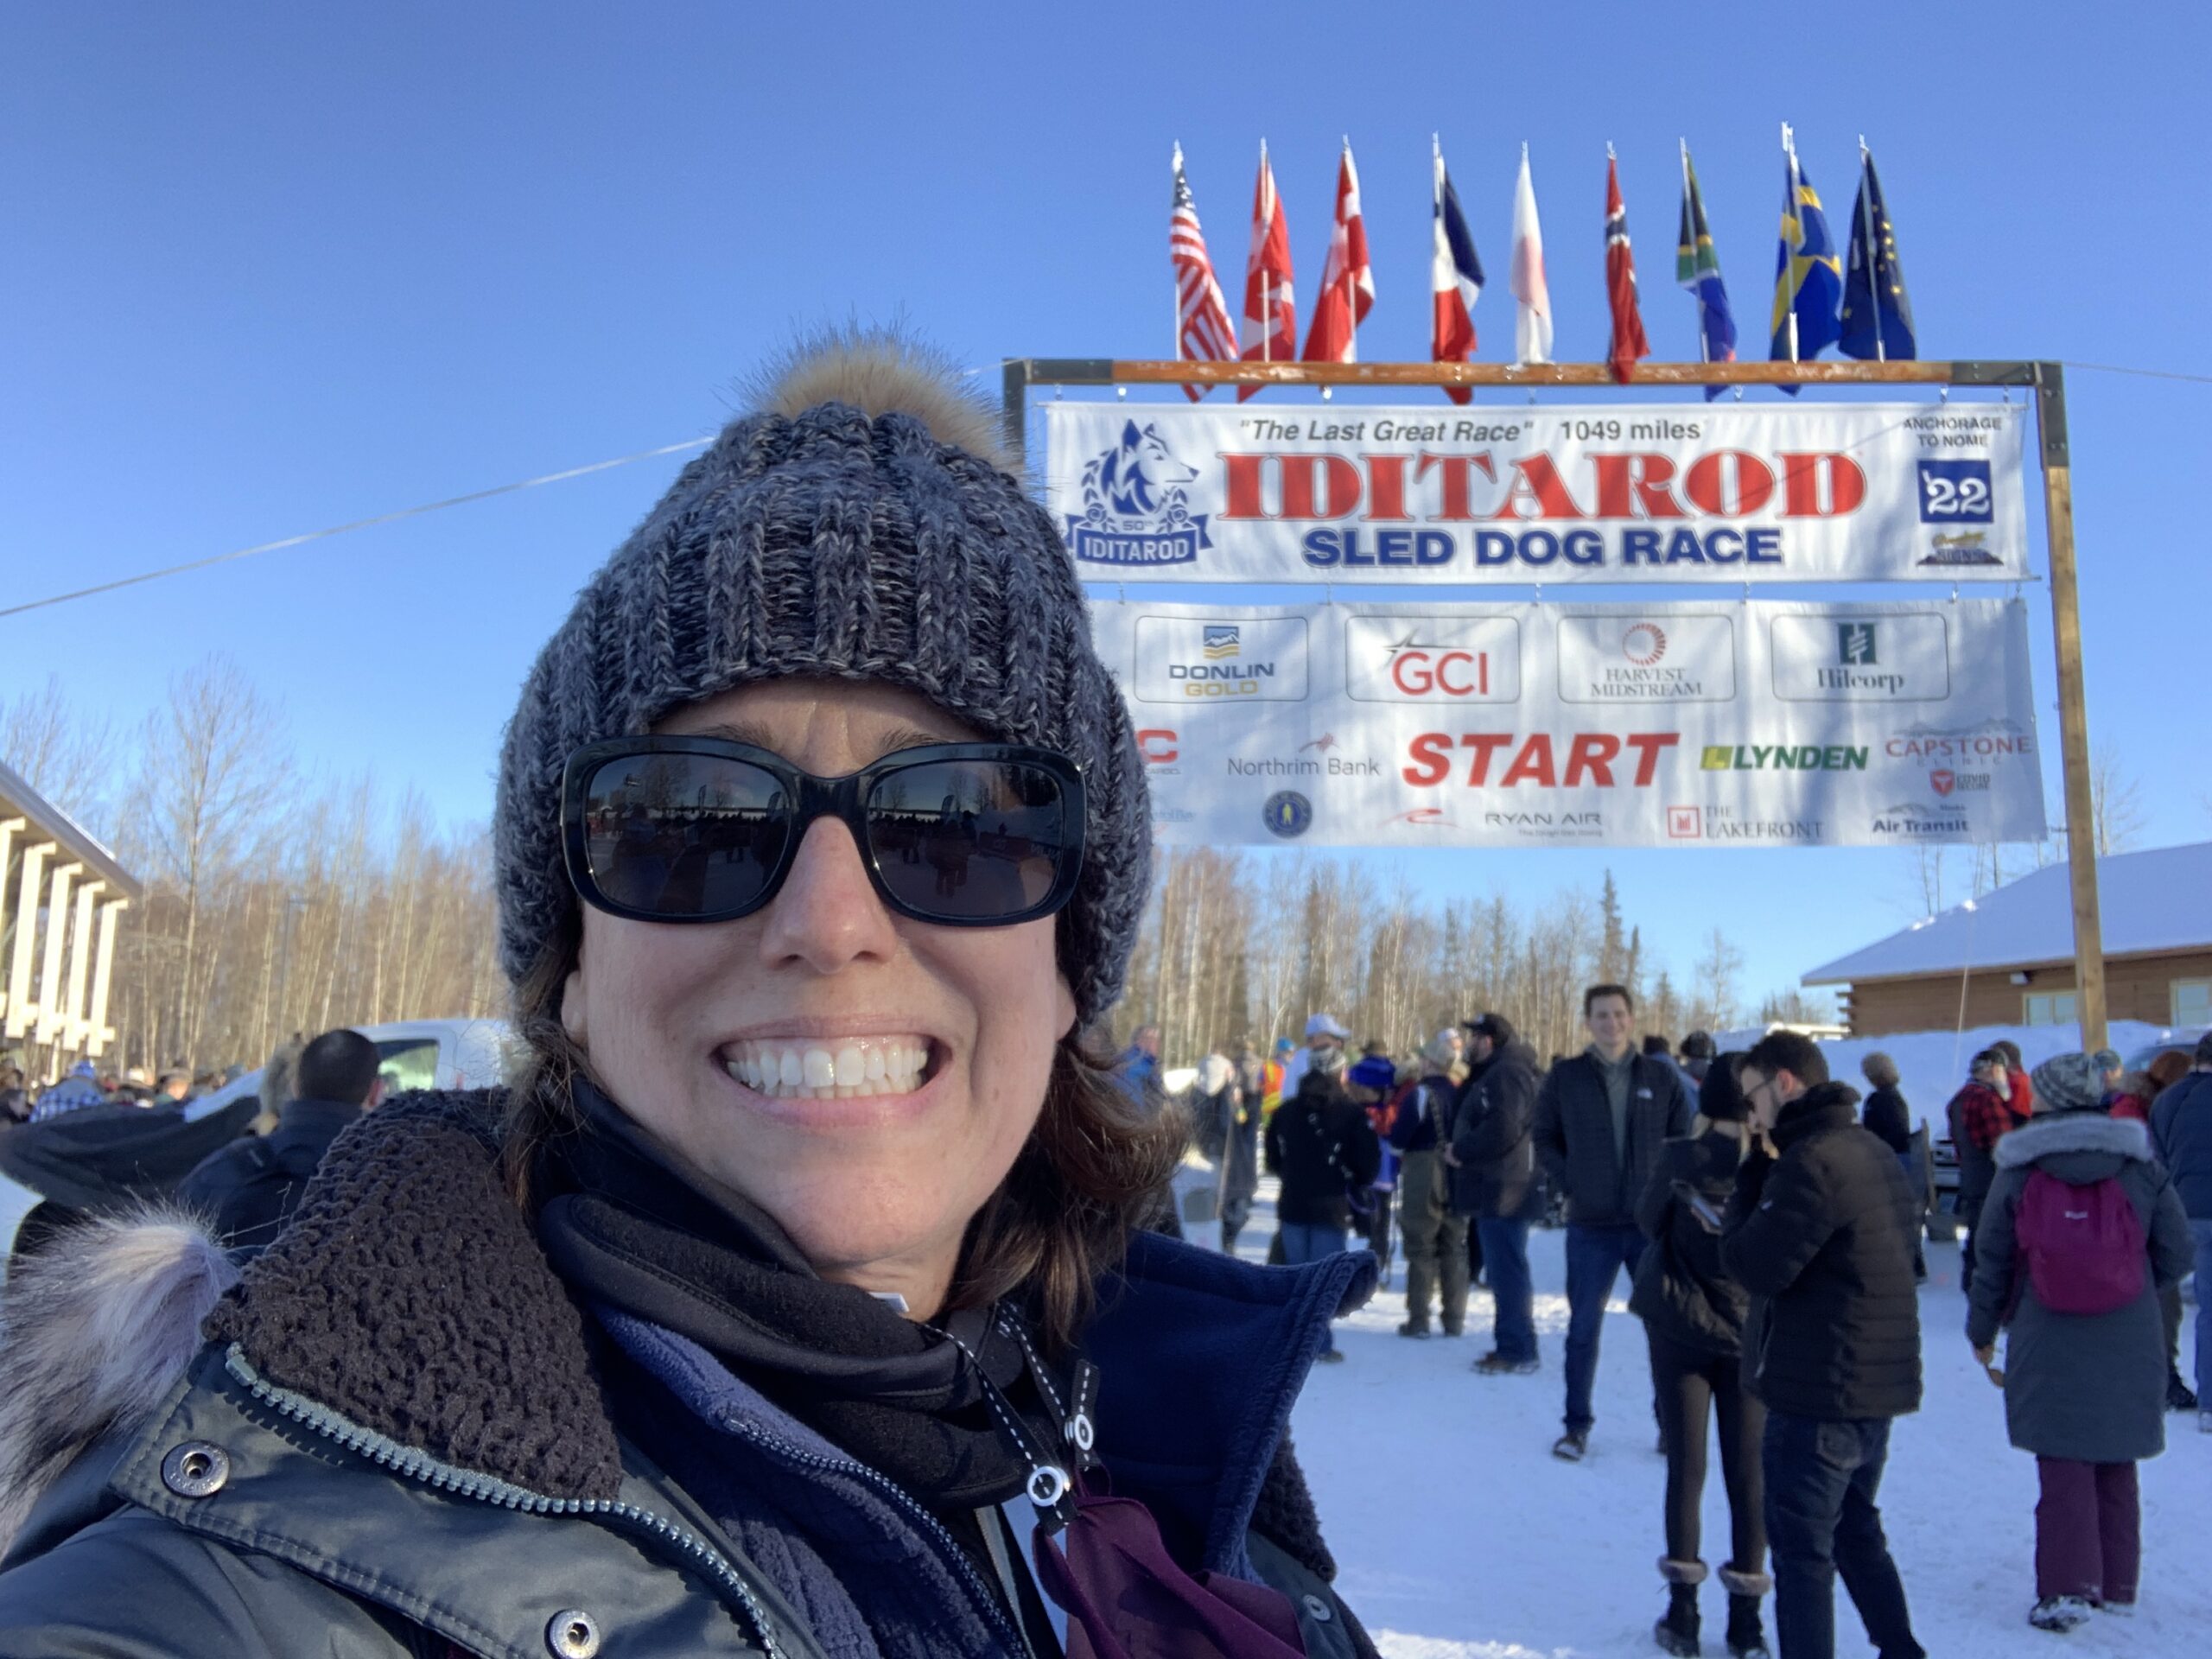 It's party time as mushers gather for Iditarod